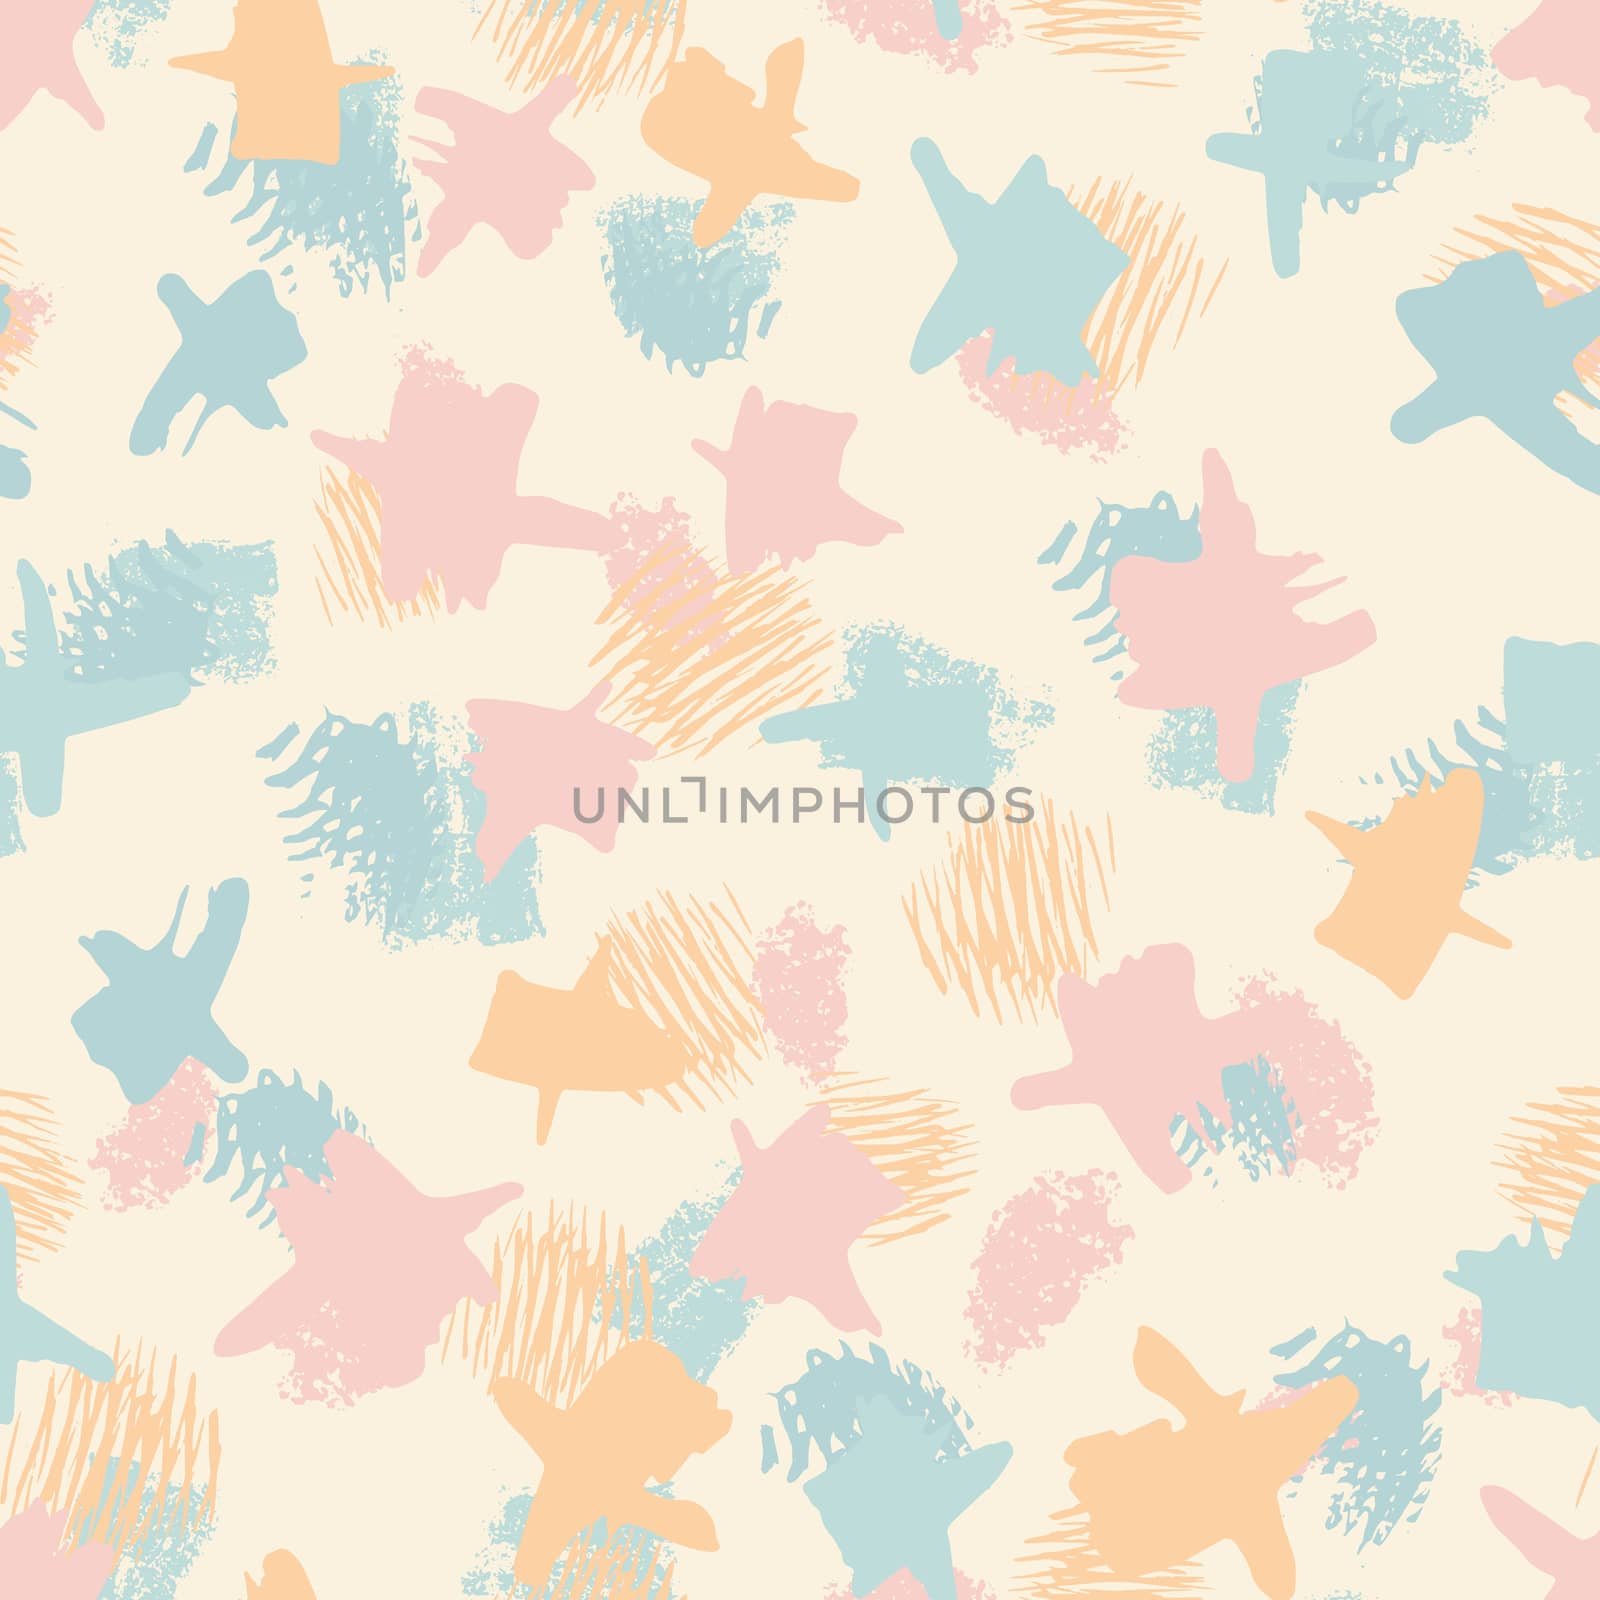 Abstract trendy pastel color brustrokes seamless pattern with hand drawn texture background. Design for wrapping paper, wallpaper, fabric print, backdrop. Vector illustration.